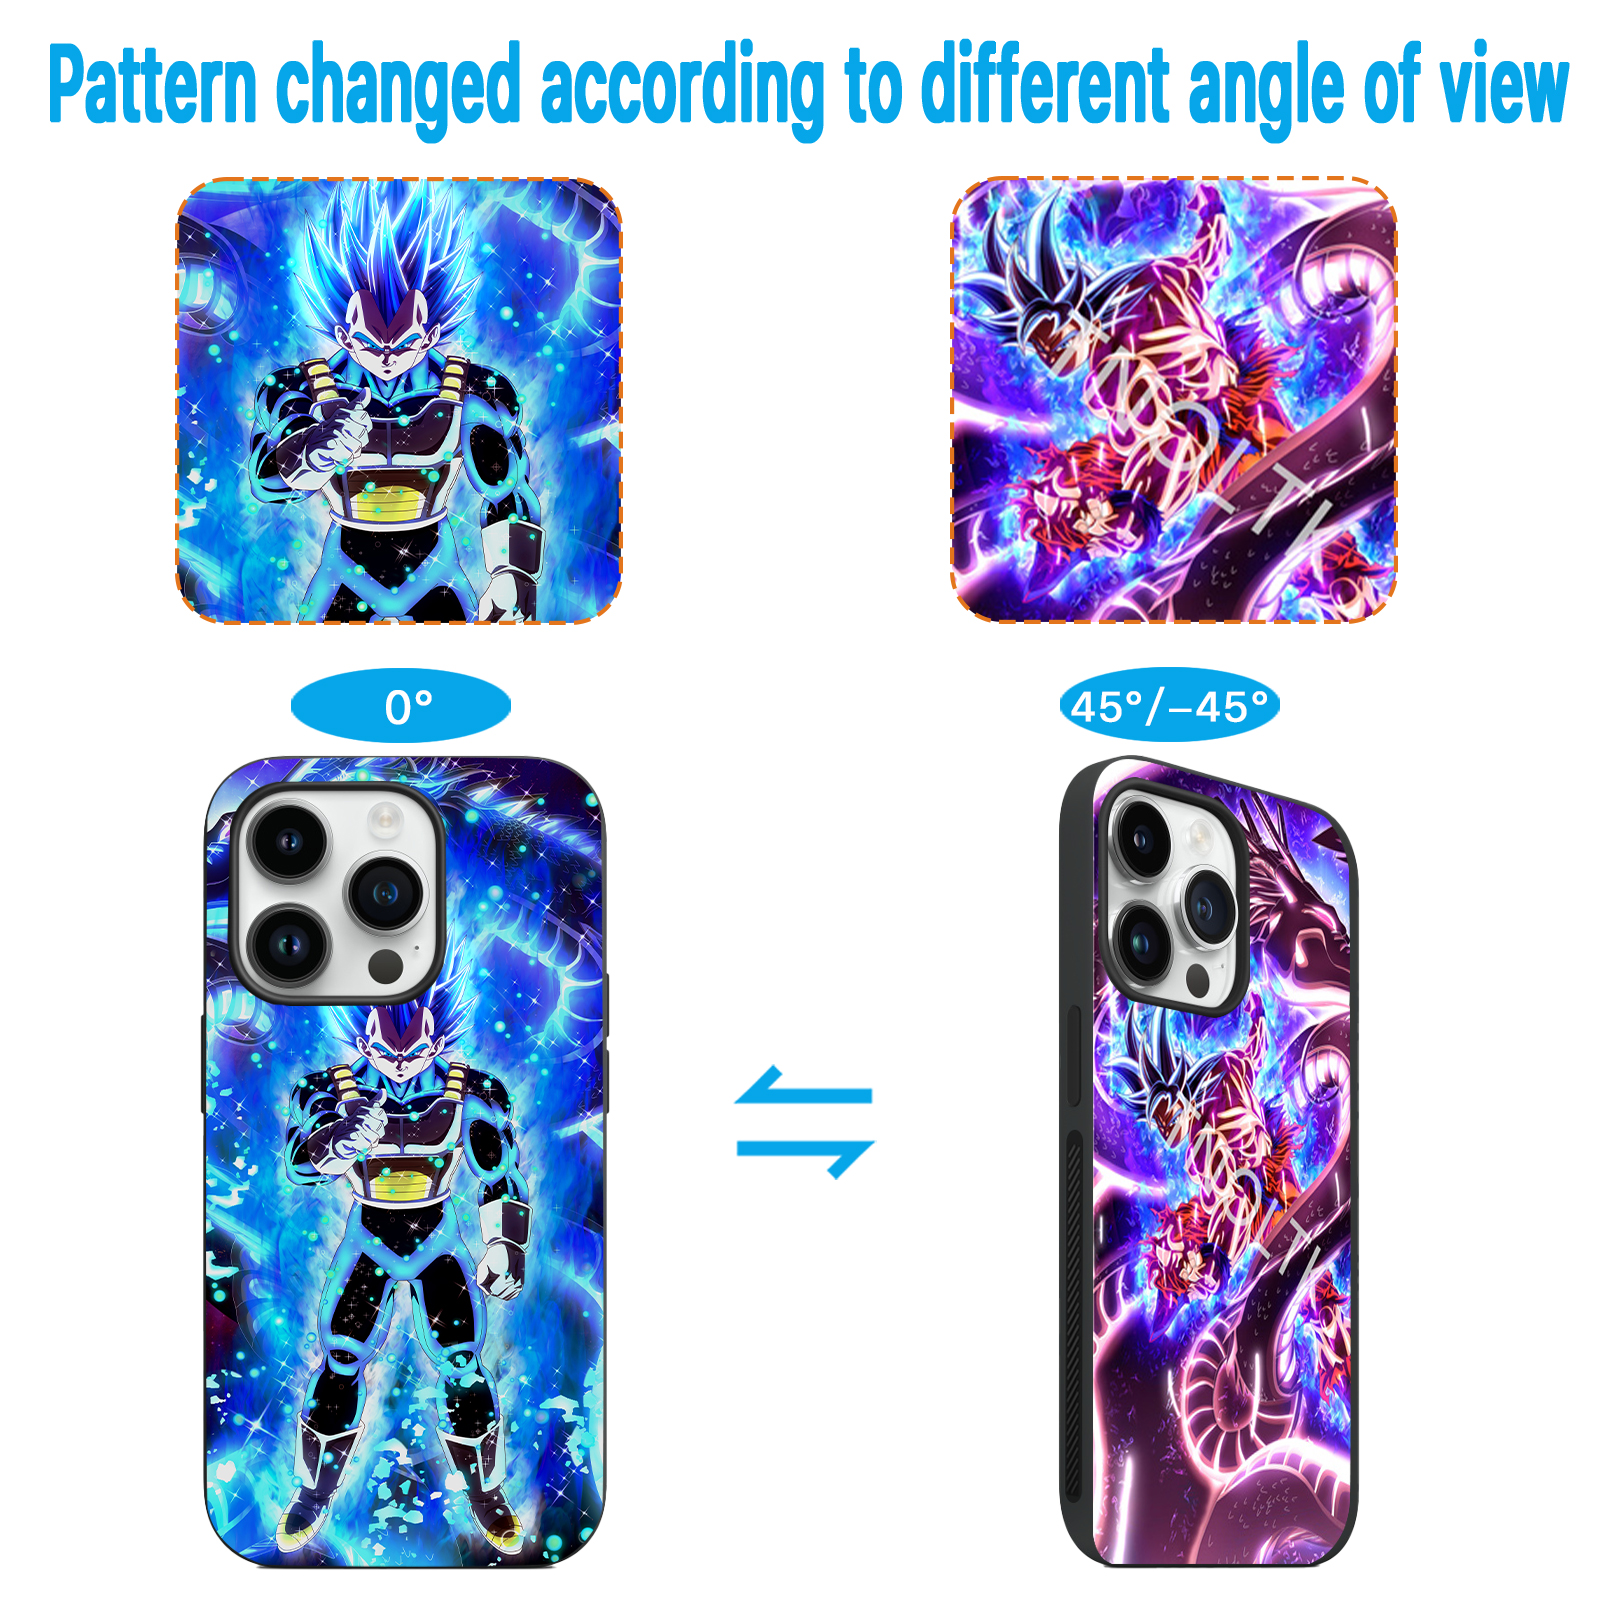 3D Motion iPhone Dragon ball Anime Phone Cases